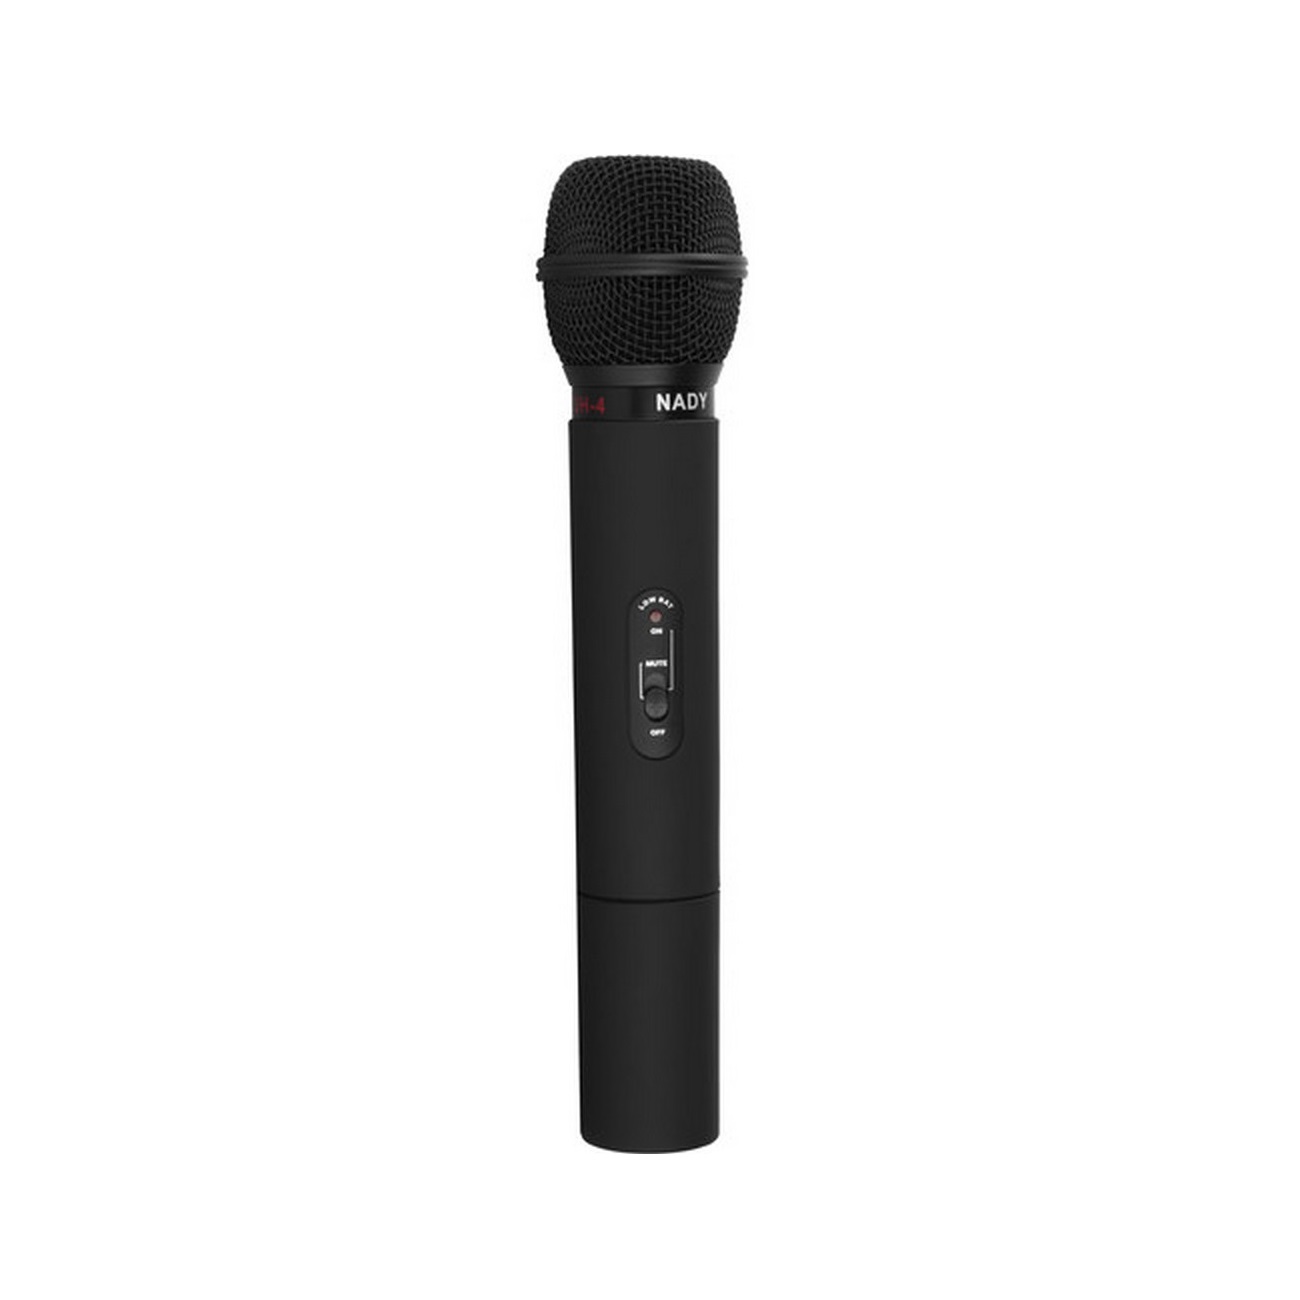 Nady Professional Handheld Wireless Microphone System UHF-4 HT/CH-11